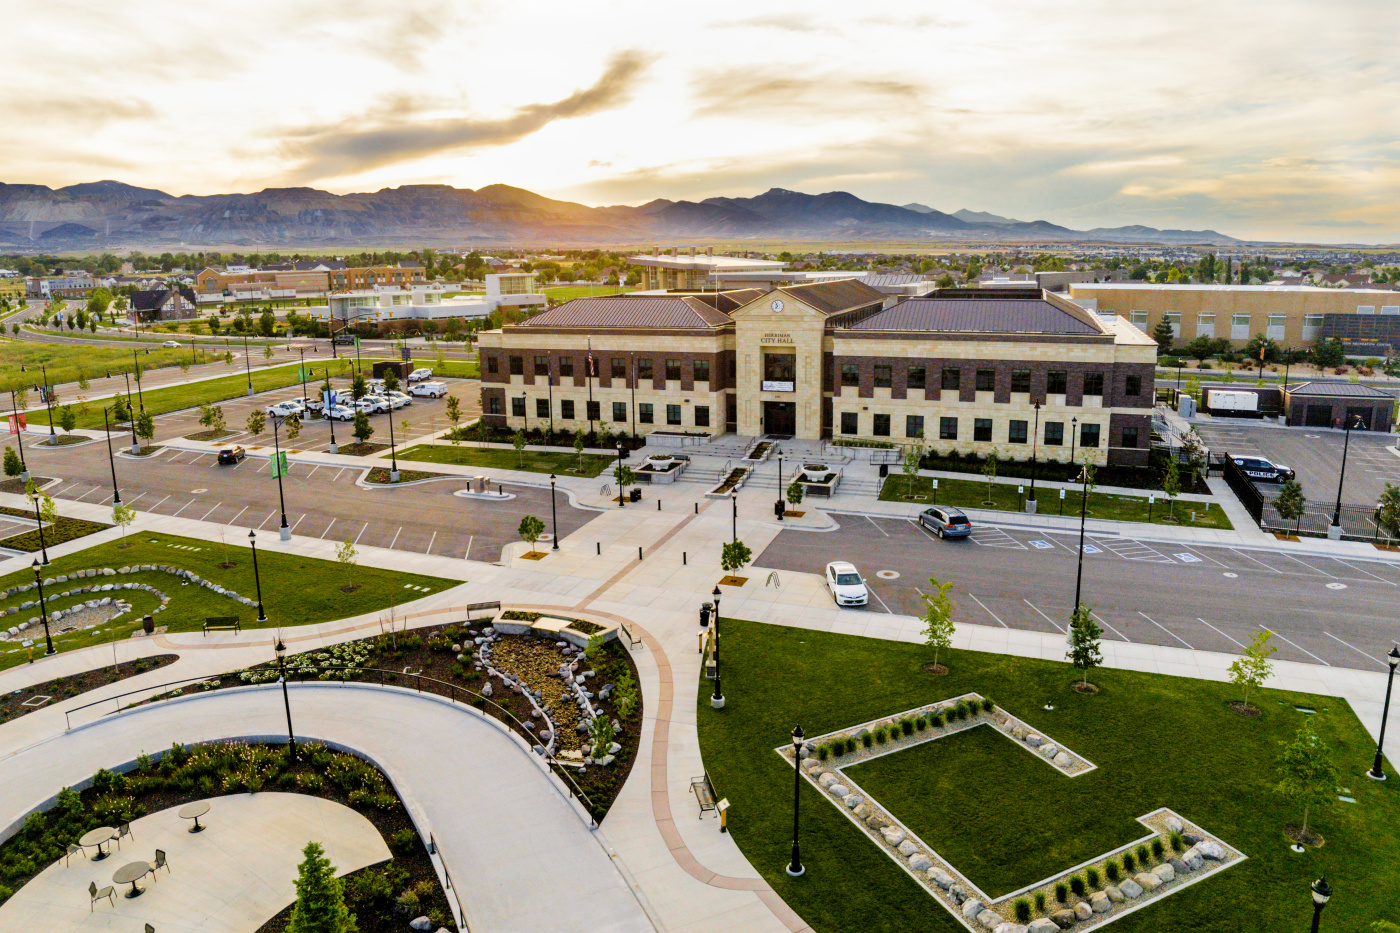 An aerial image of the Herriman City Hall around sunset